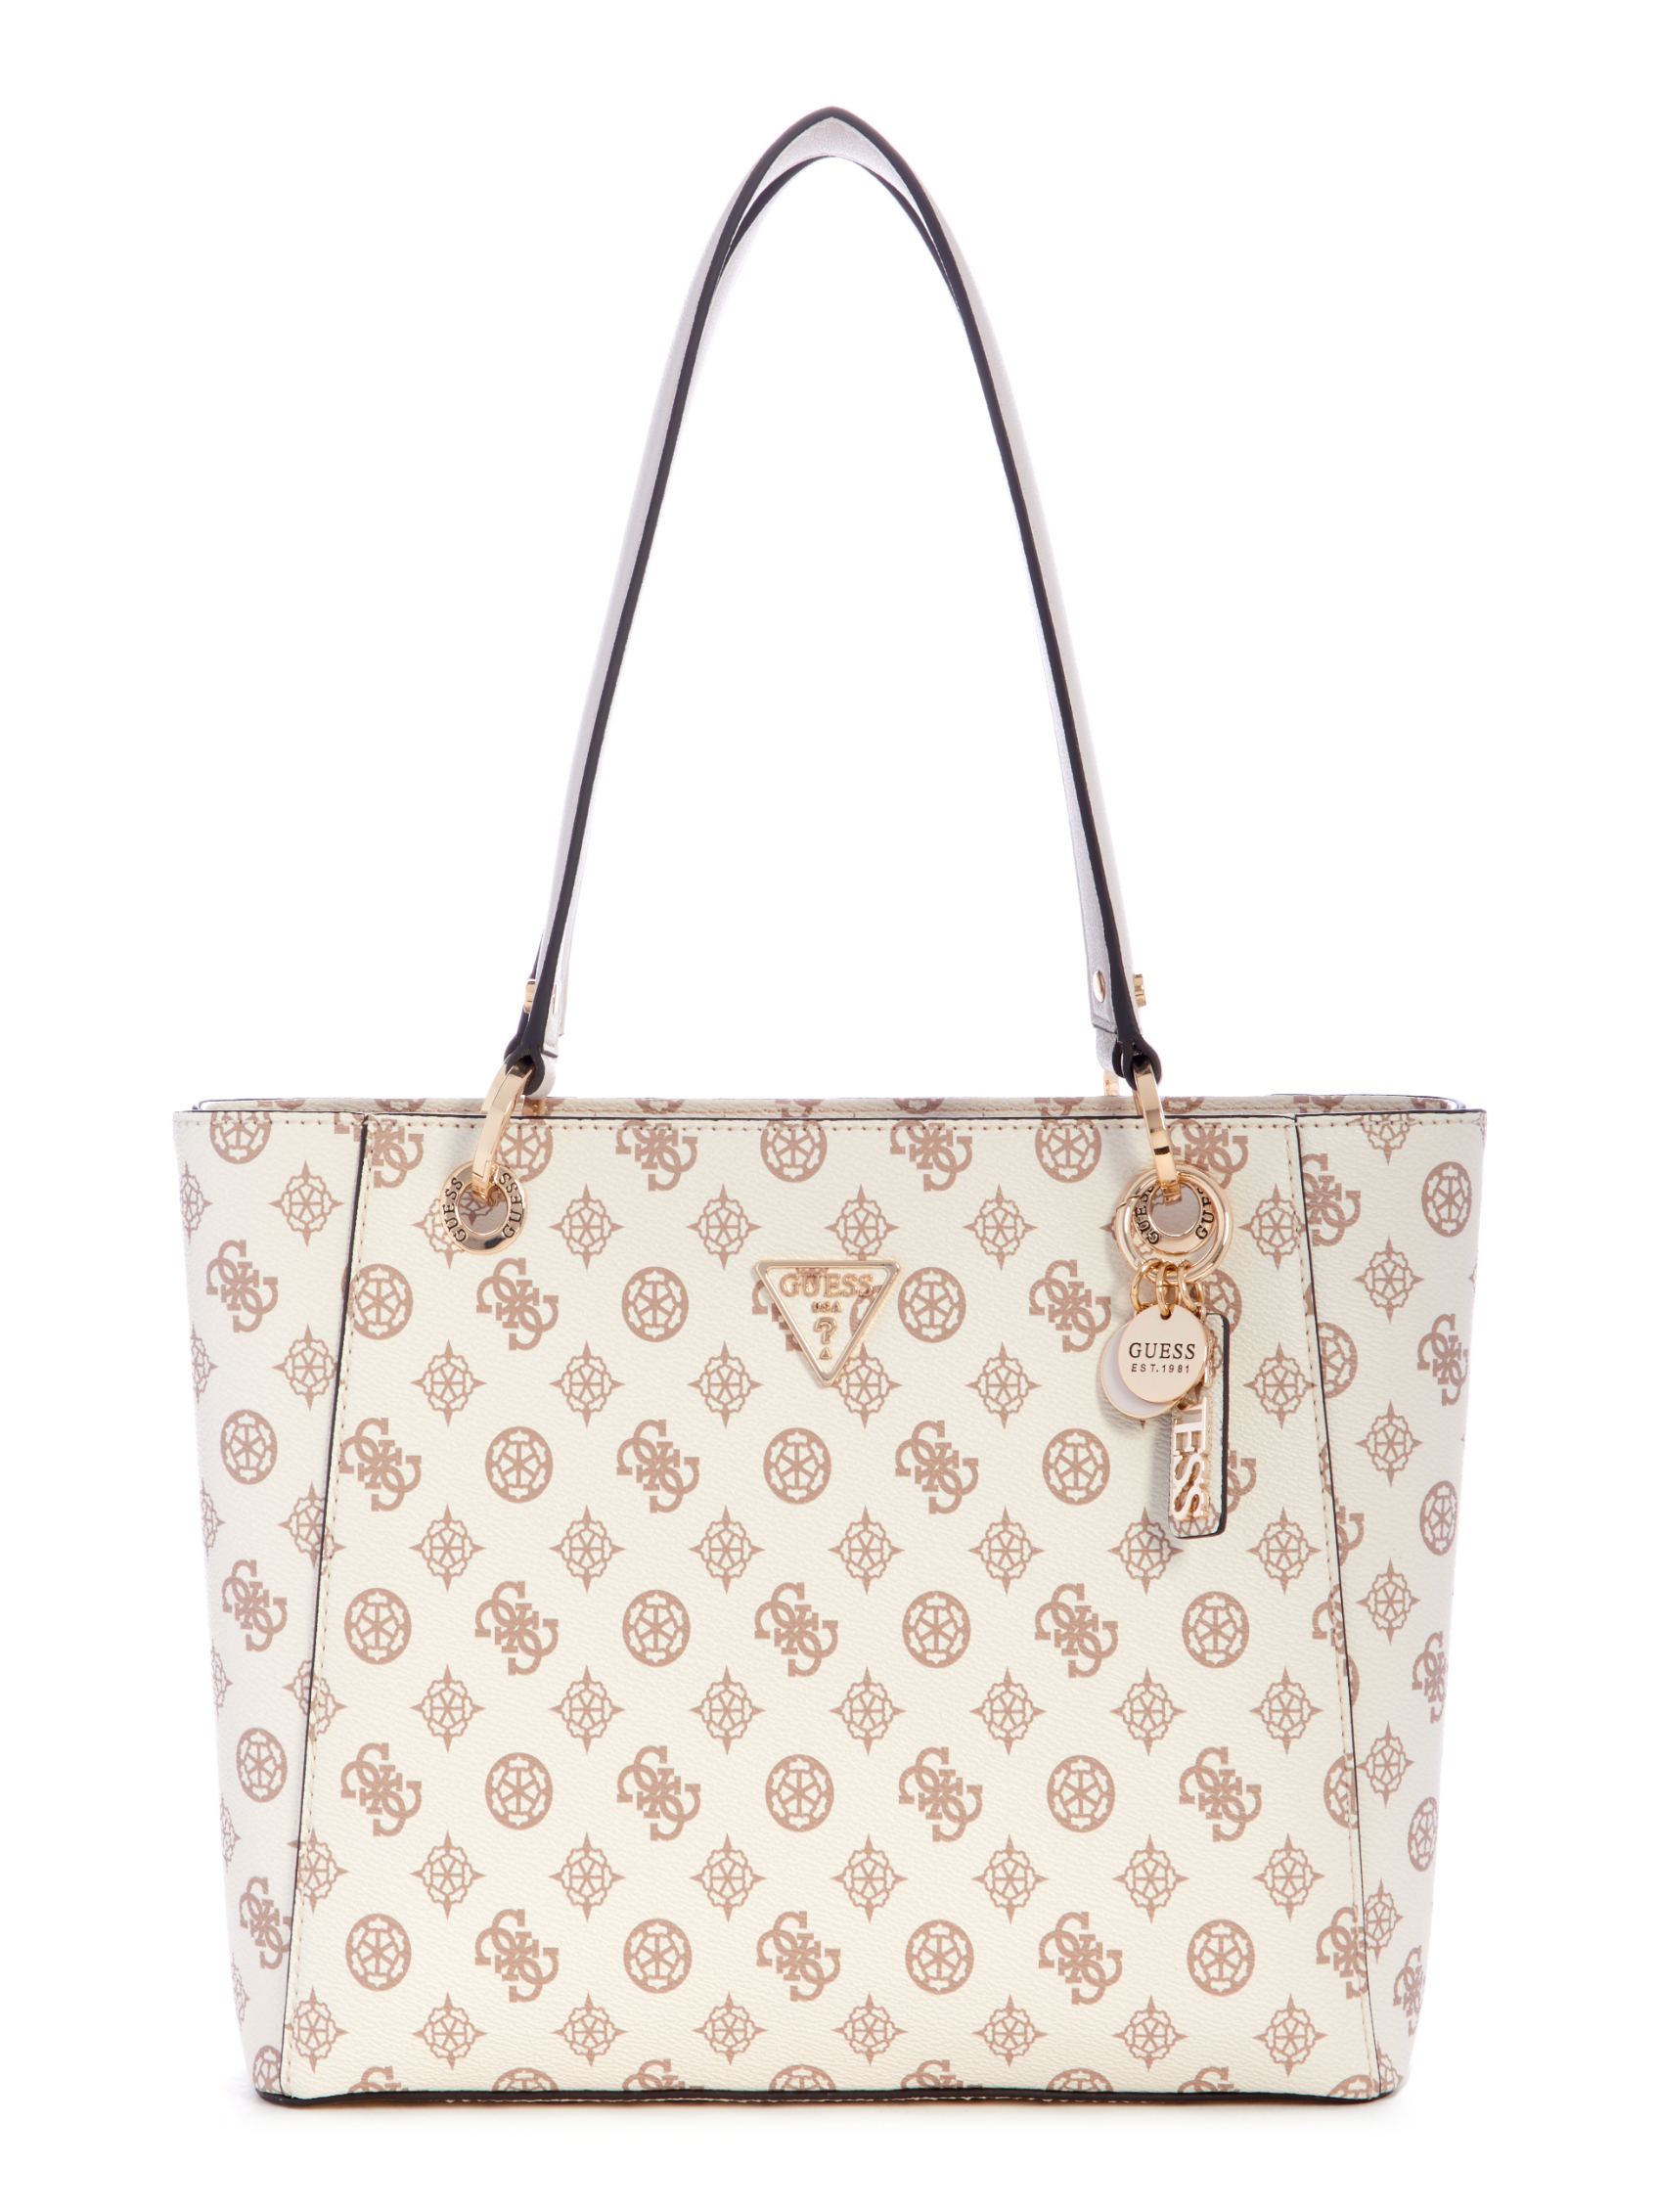 NOELLE SMALL NOEL TOTE | Guess Philippines